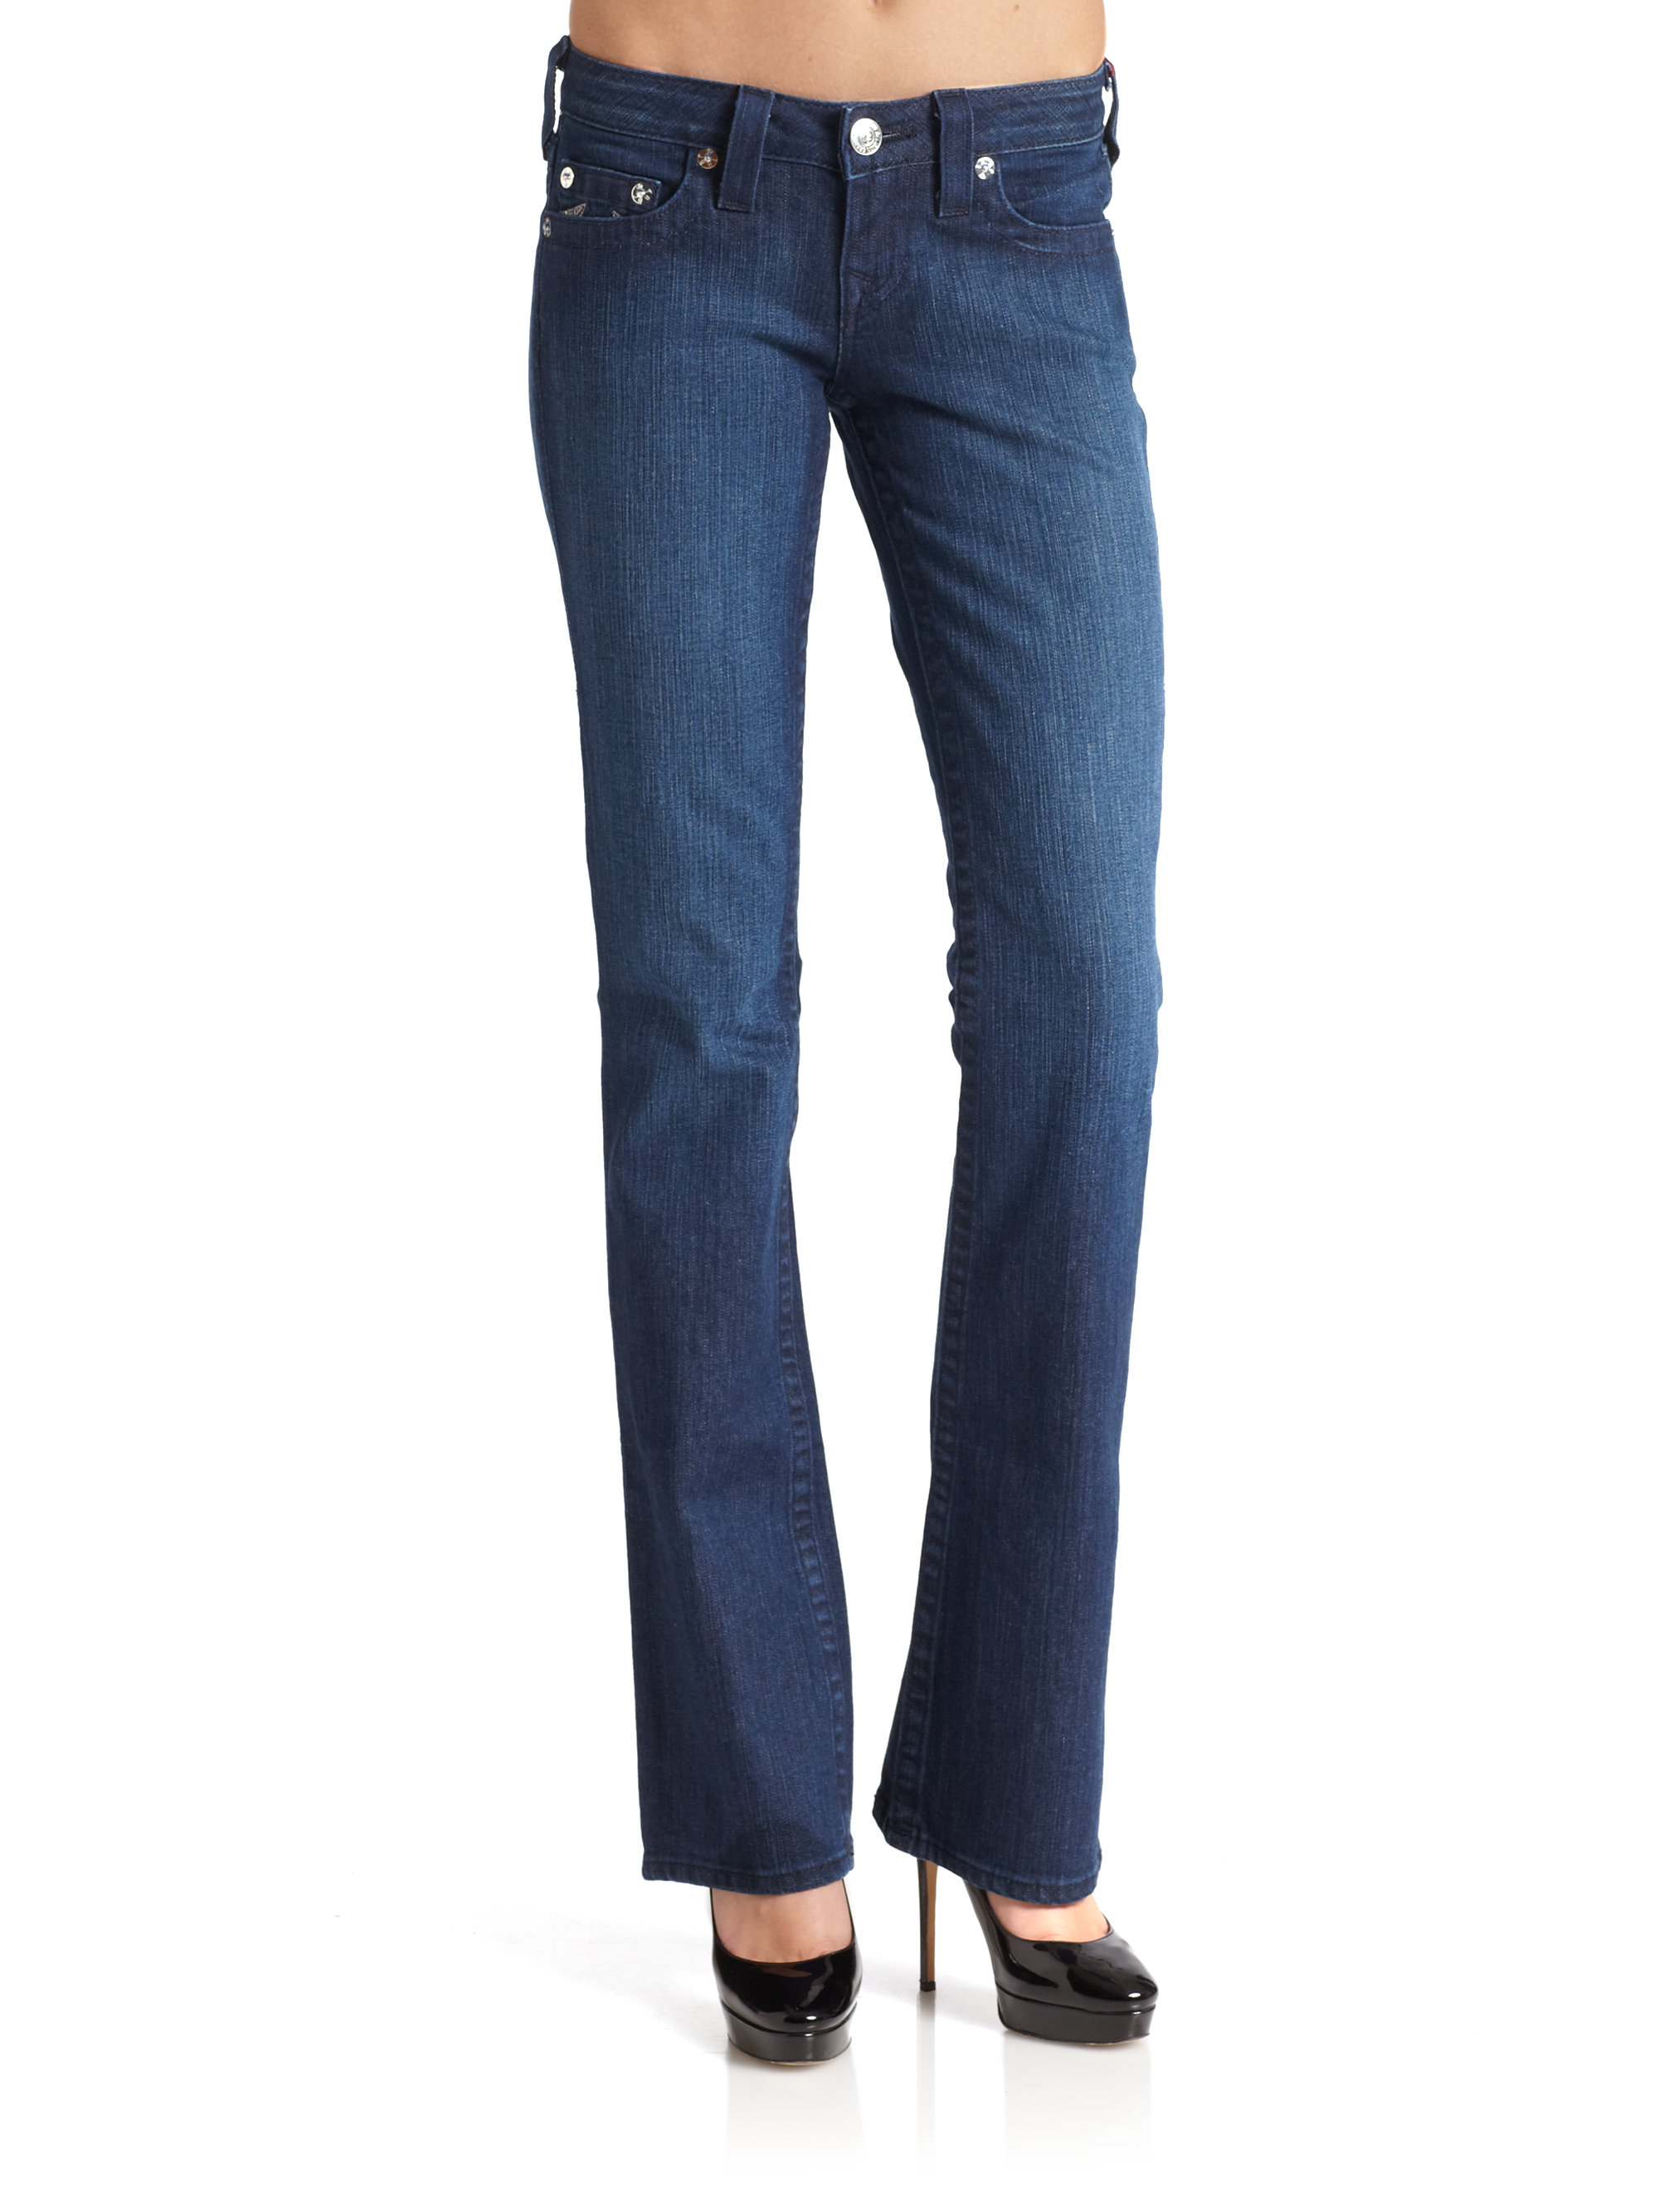 Lyst - True Religion Tori Embellished Bootcut Jeans in Blue